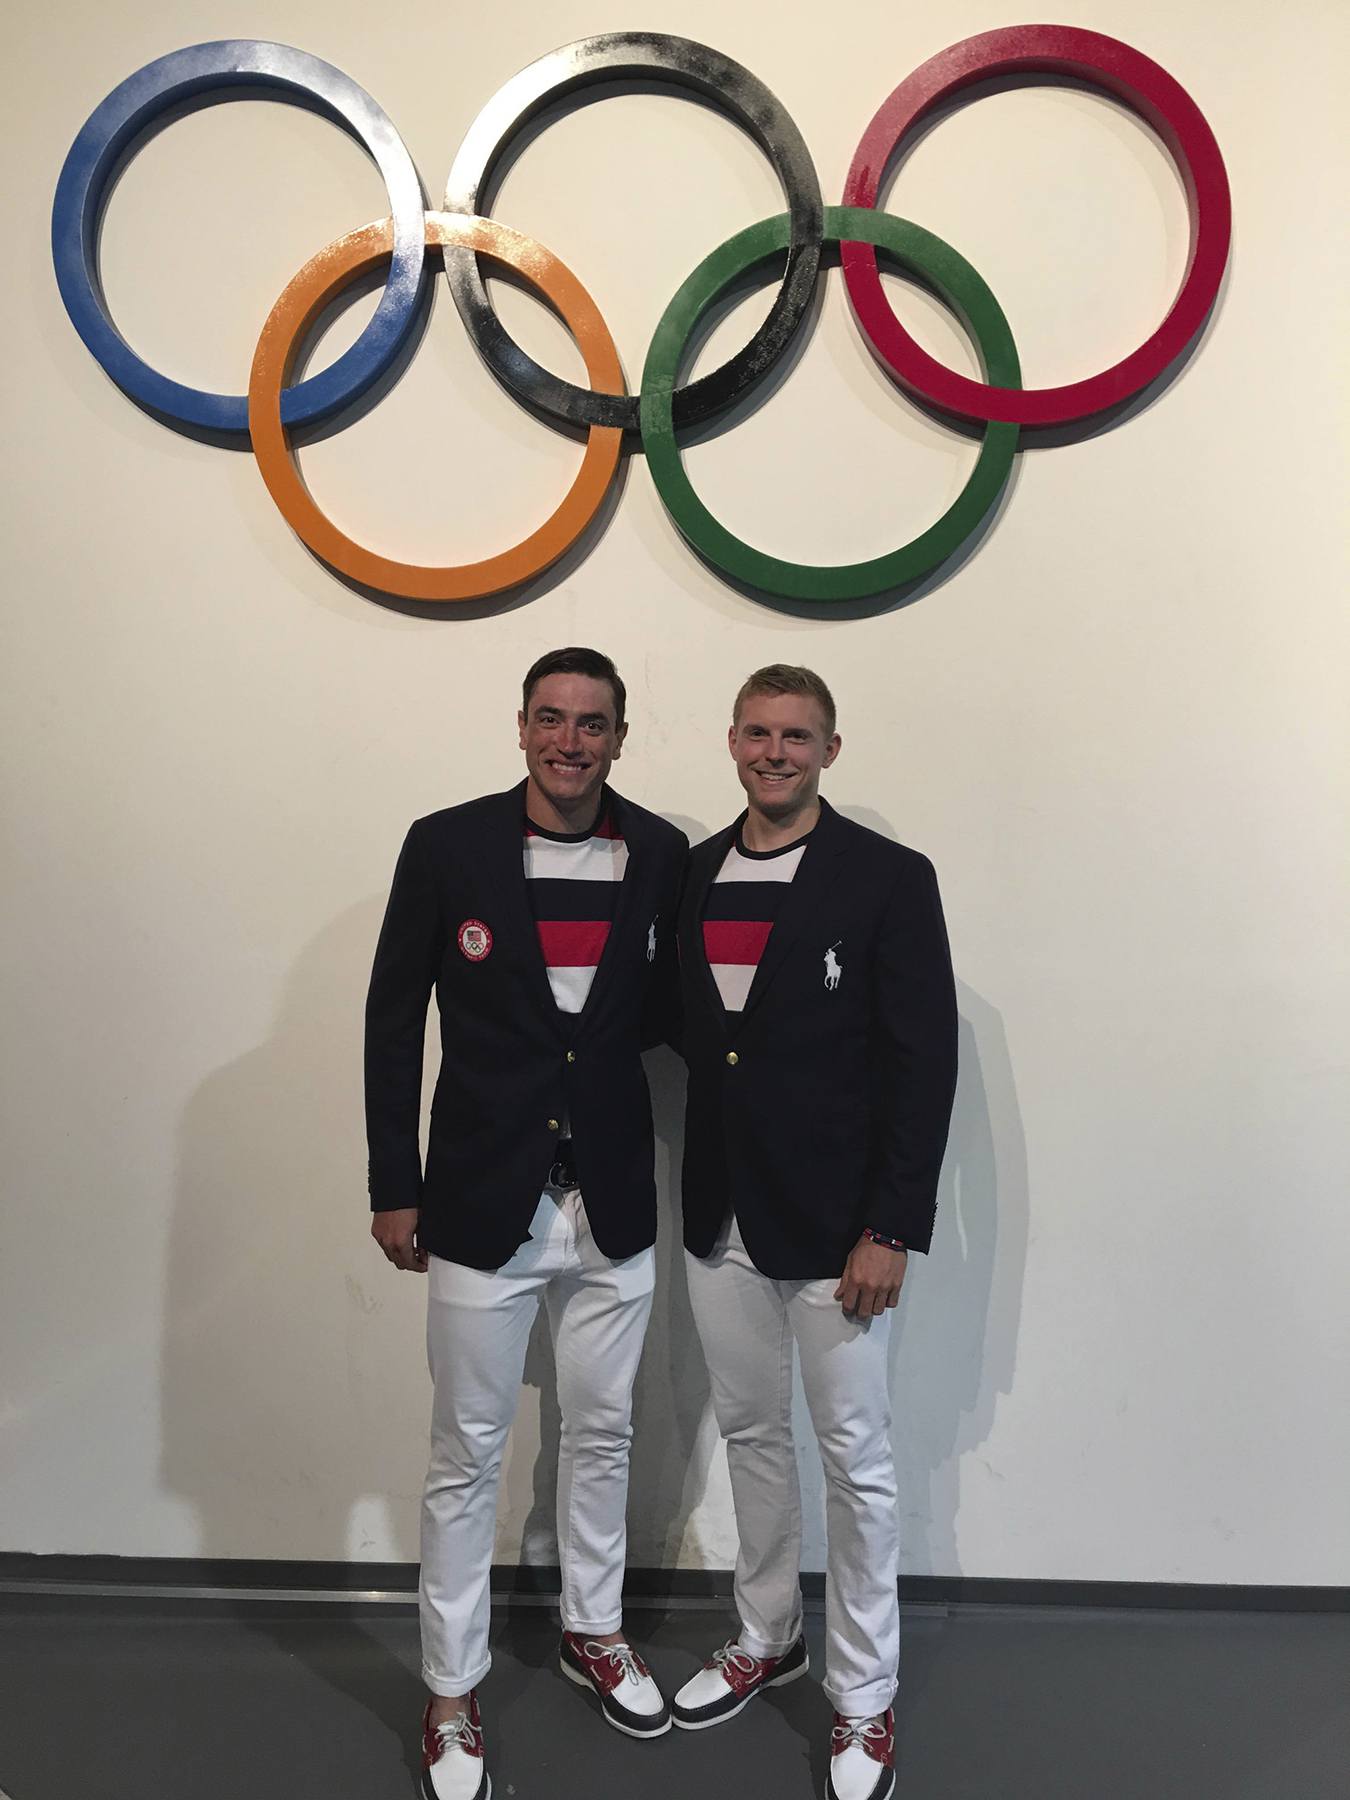 Bellevue Christian alum’s Olympic rowing team finishes fourth